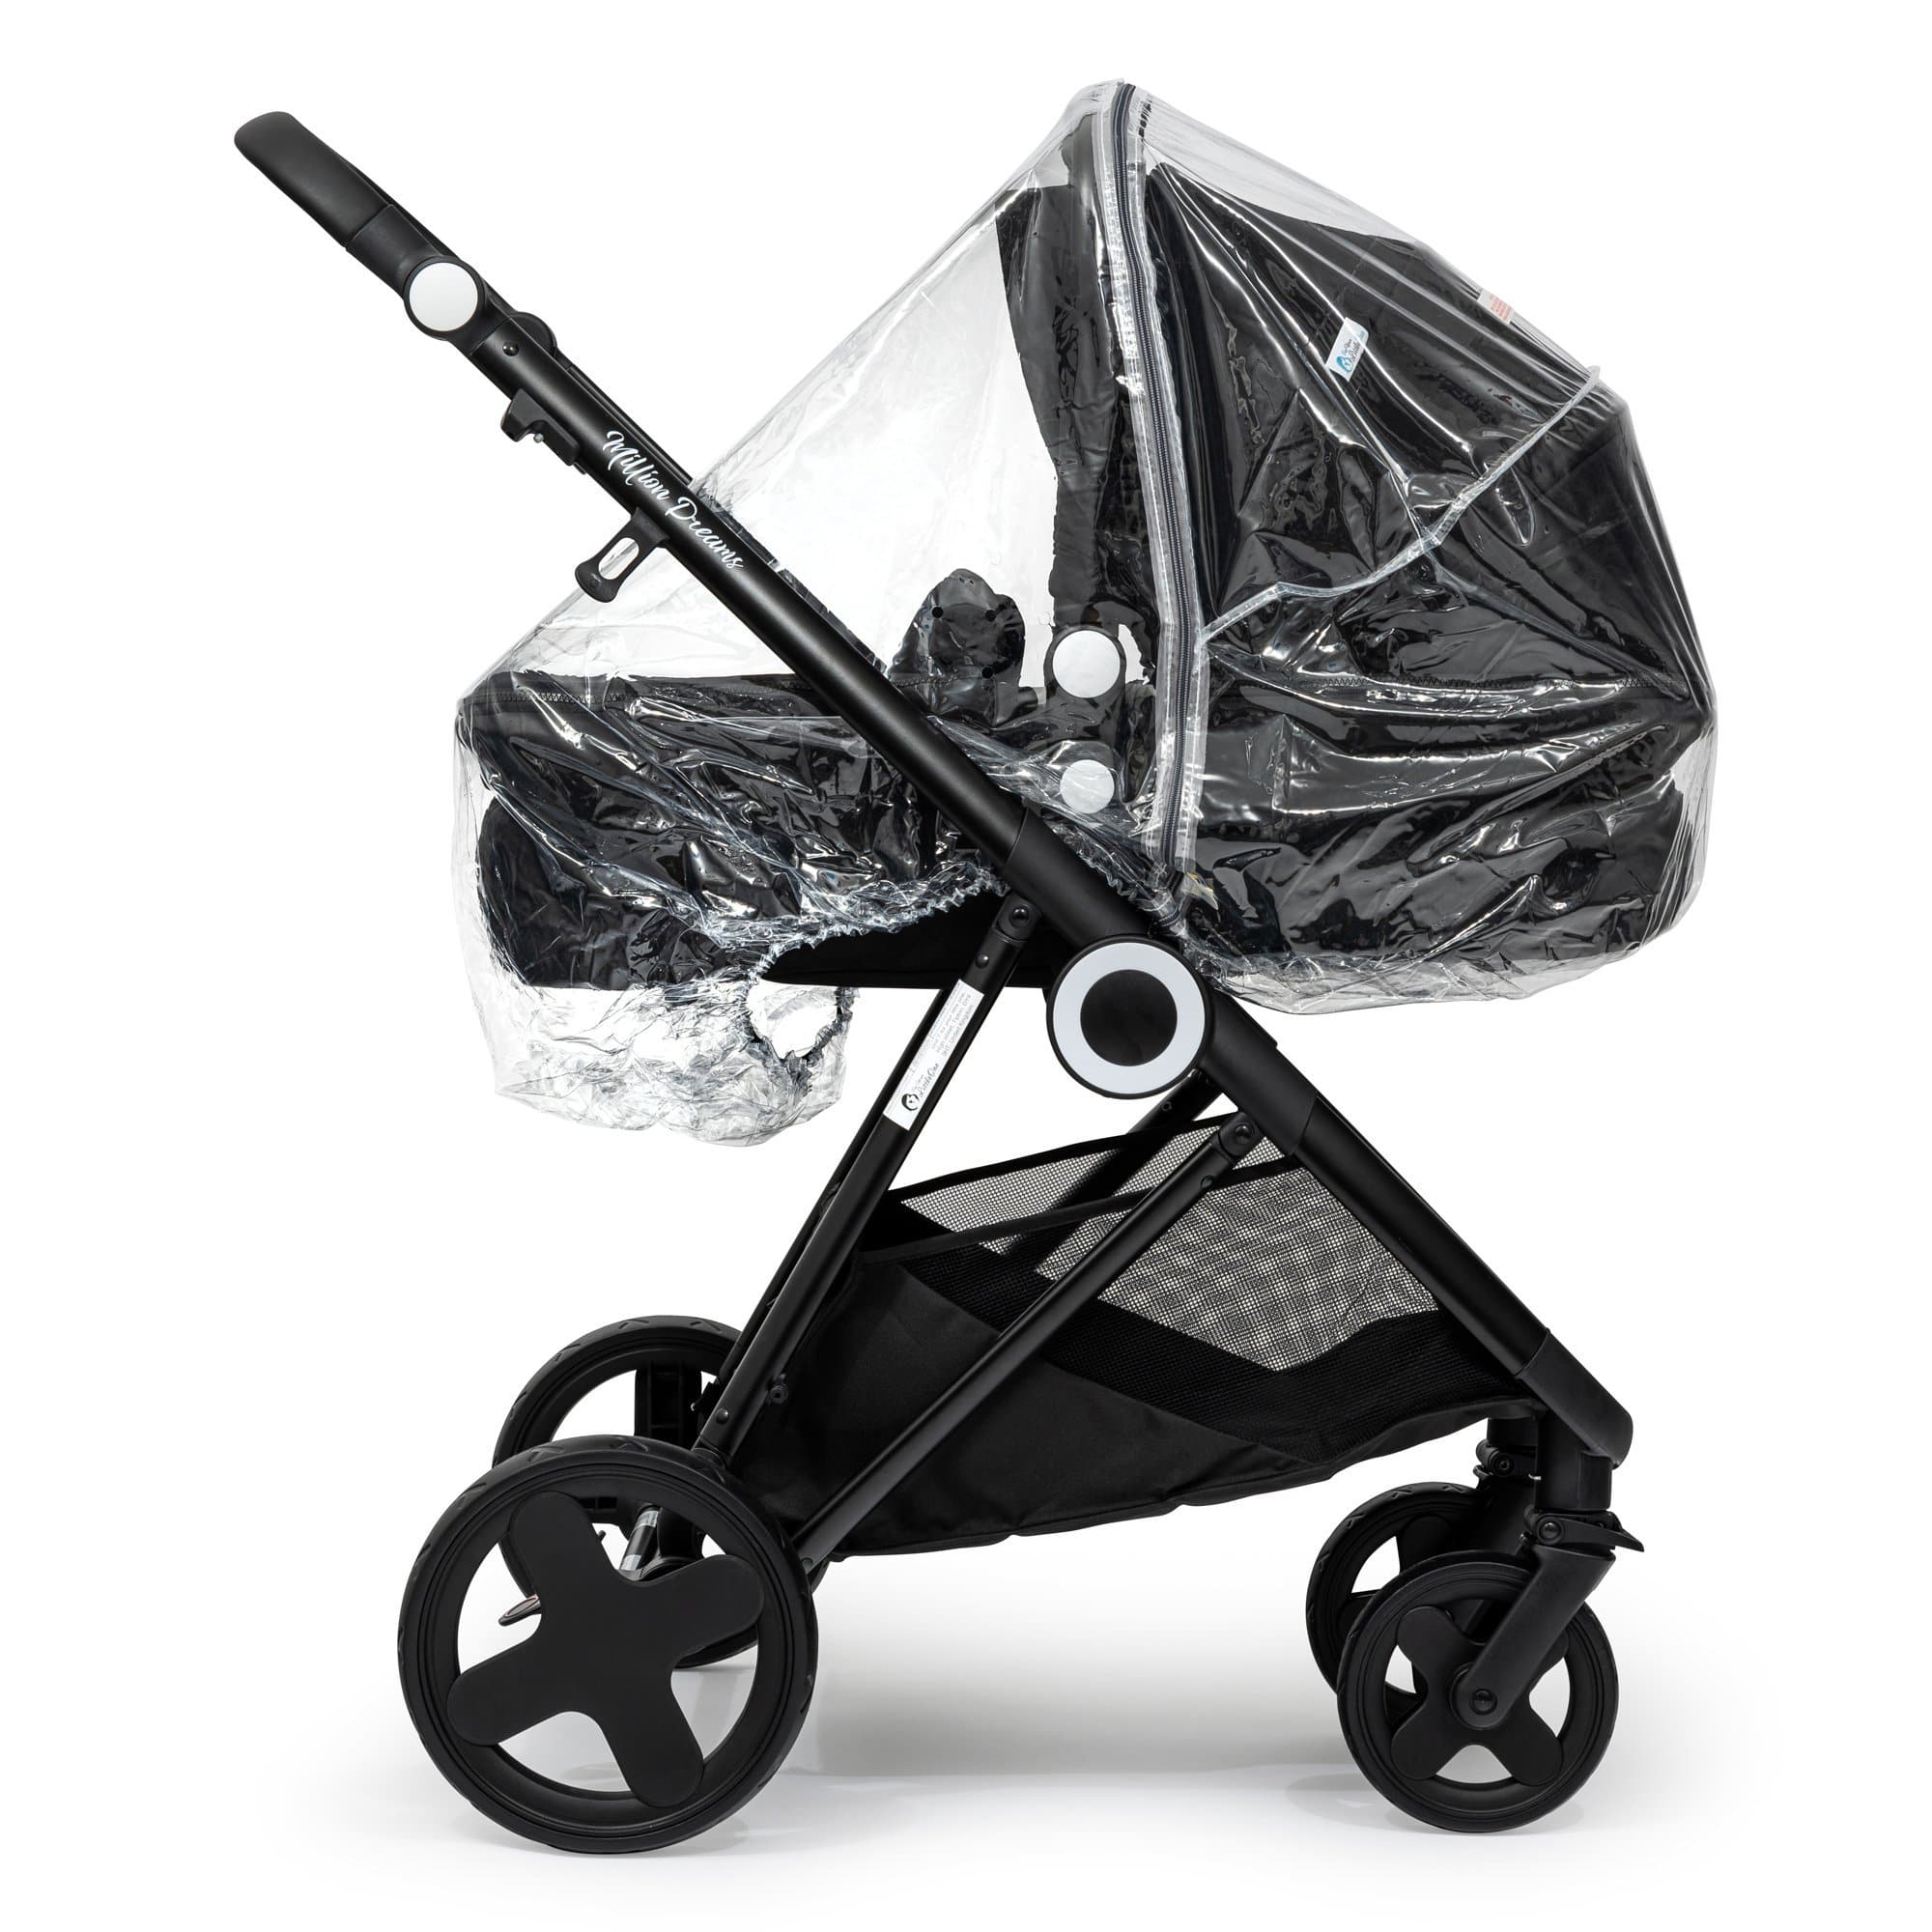 2 in 1 Rain Cover Compatible with Combi - Fits All Models - For Your Little One